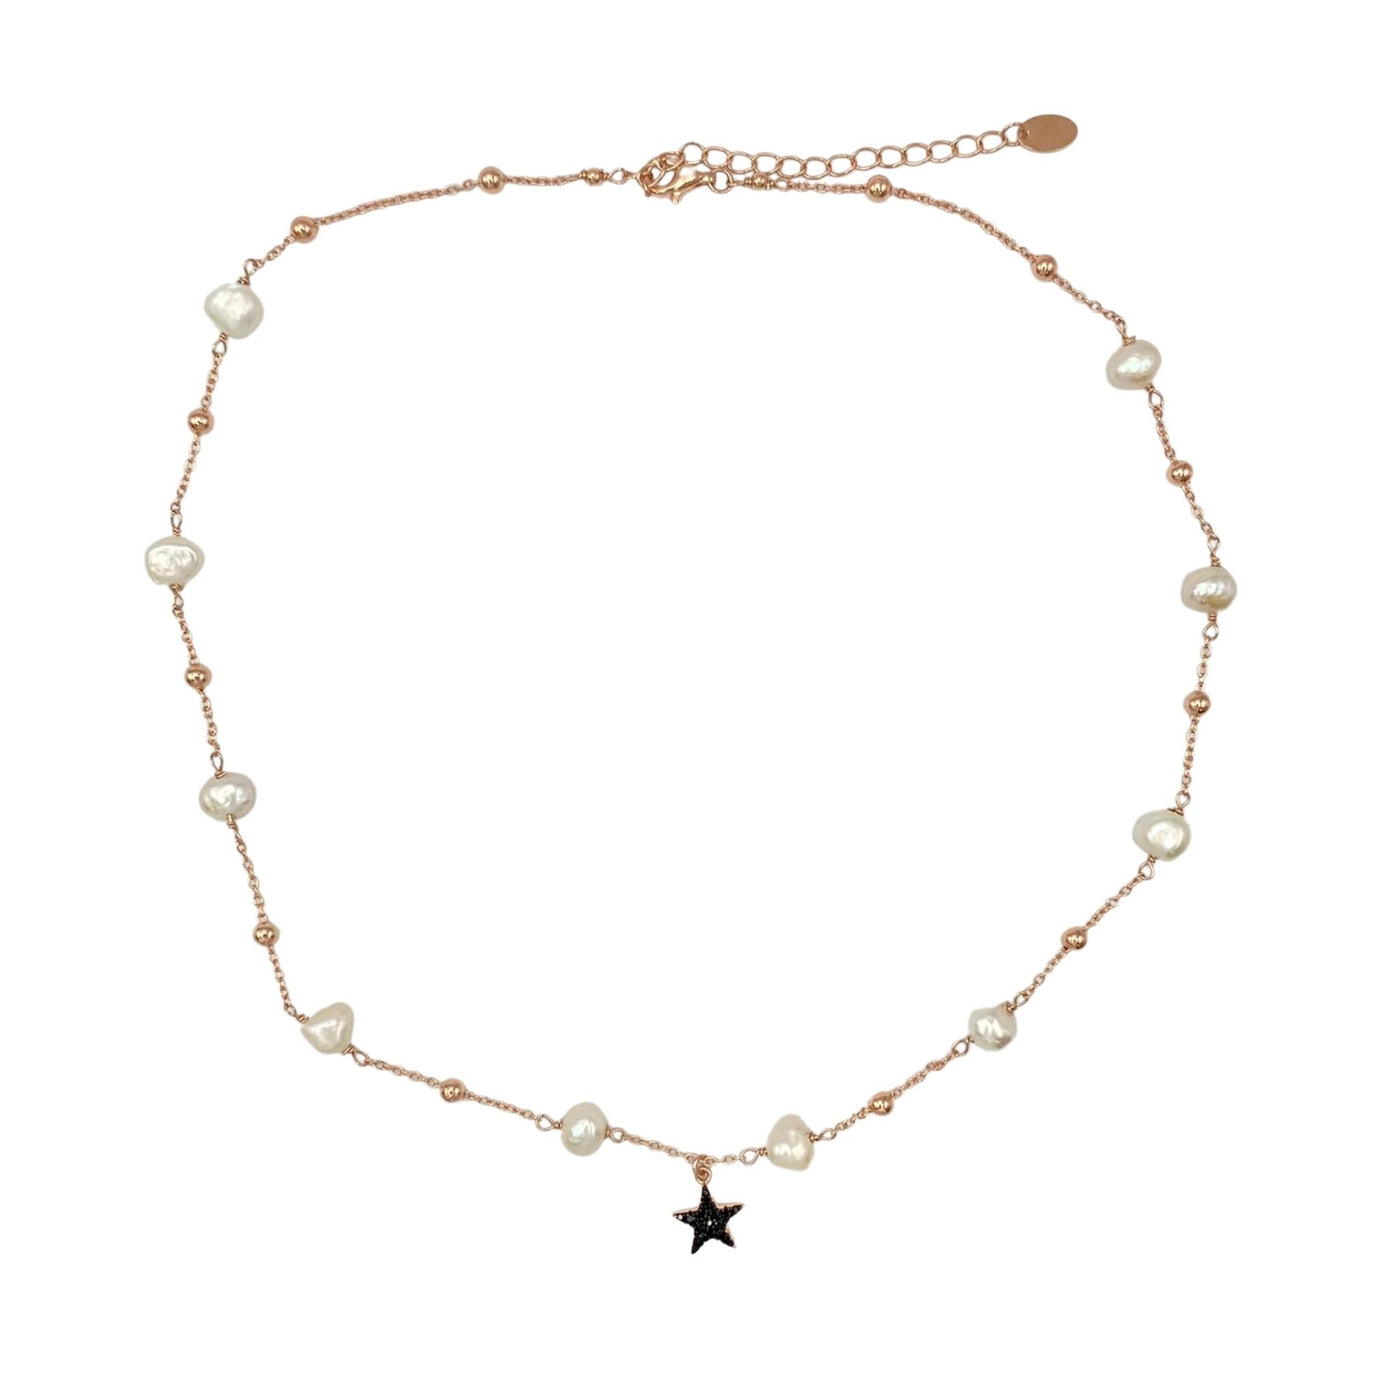 Silver necklace with pearls and star